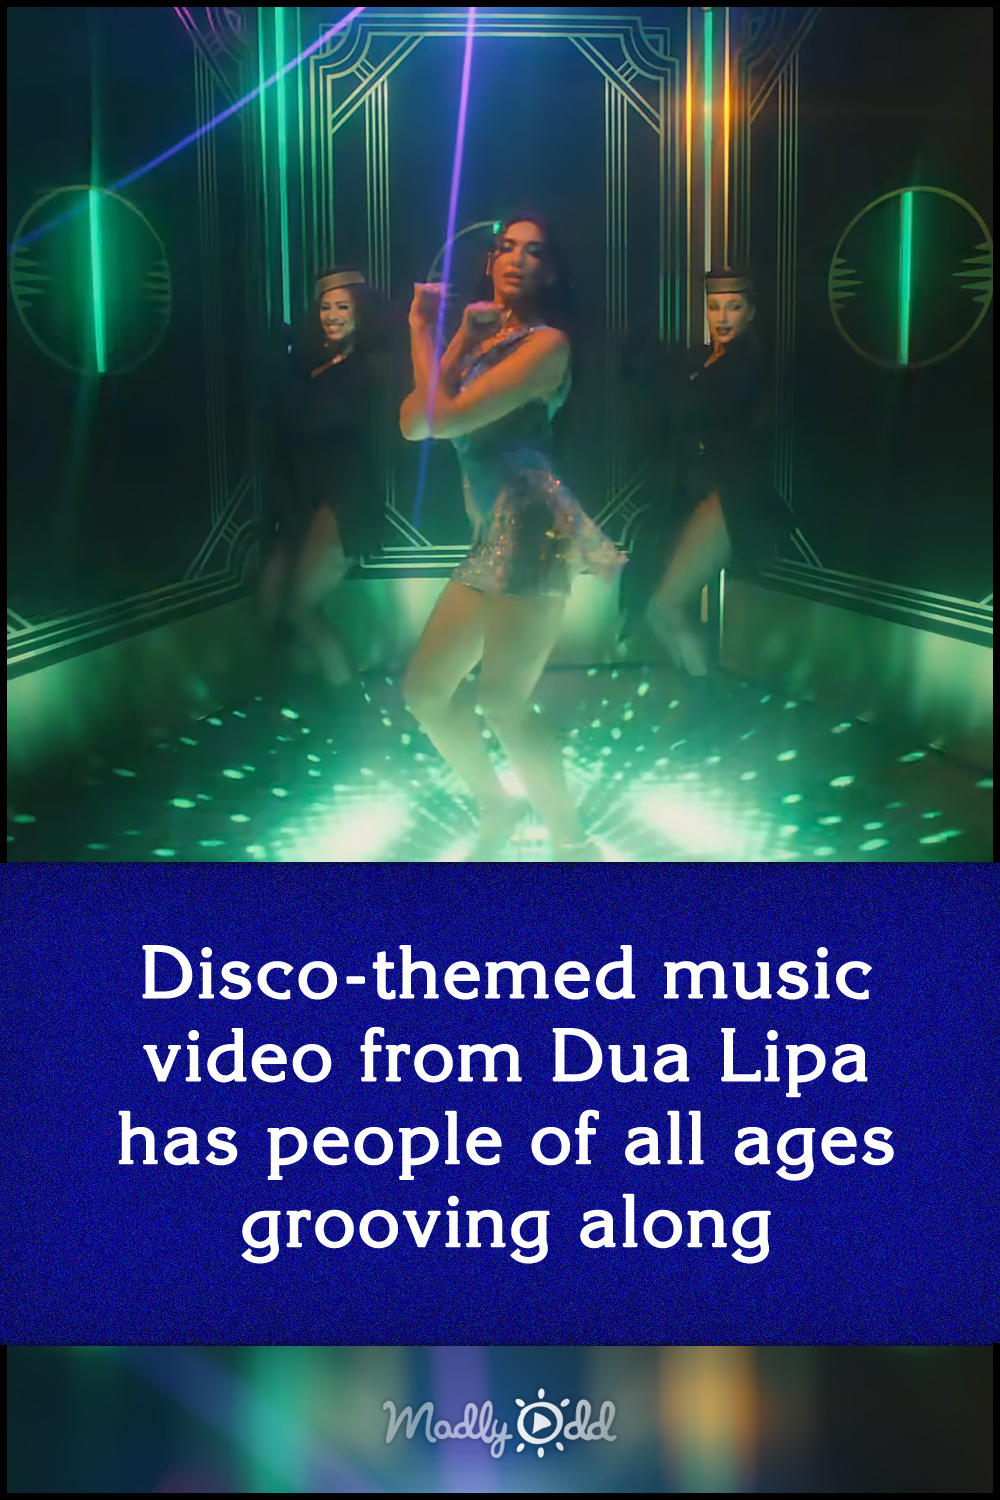 Disco-themed music video from Dua Lipa has people of all ages grooving along